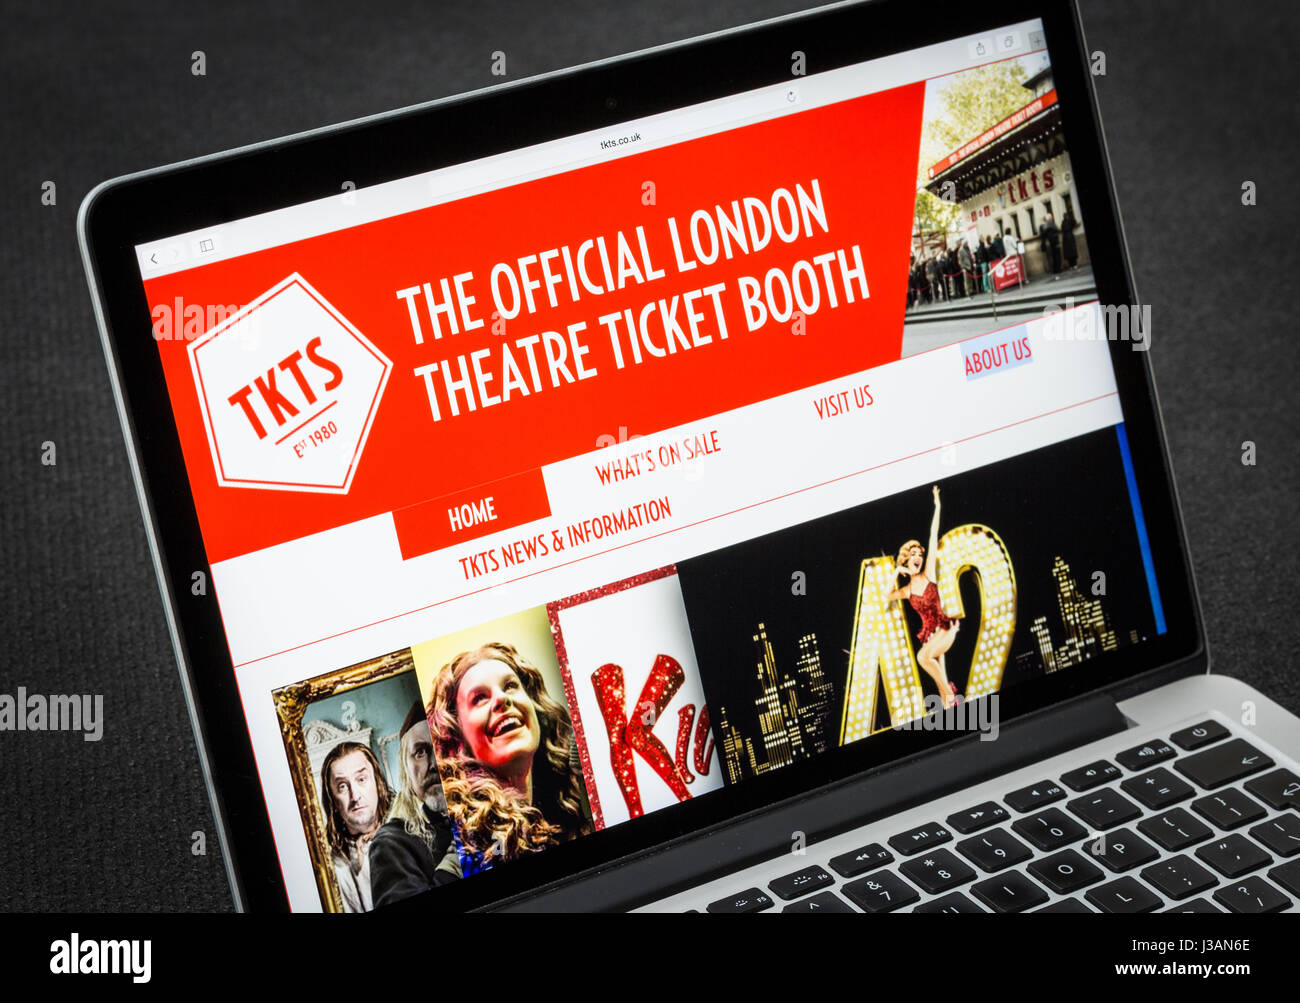 TKTS official London Theatre Ticket Booth website Foto Stock